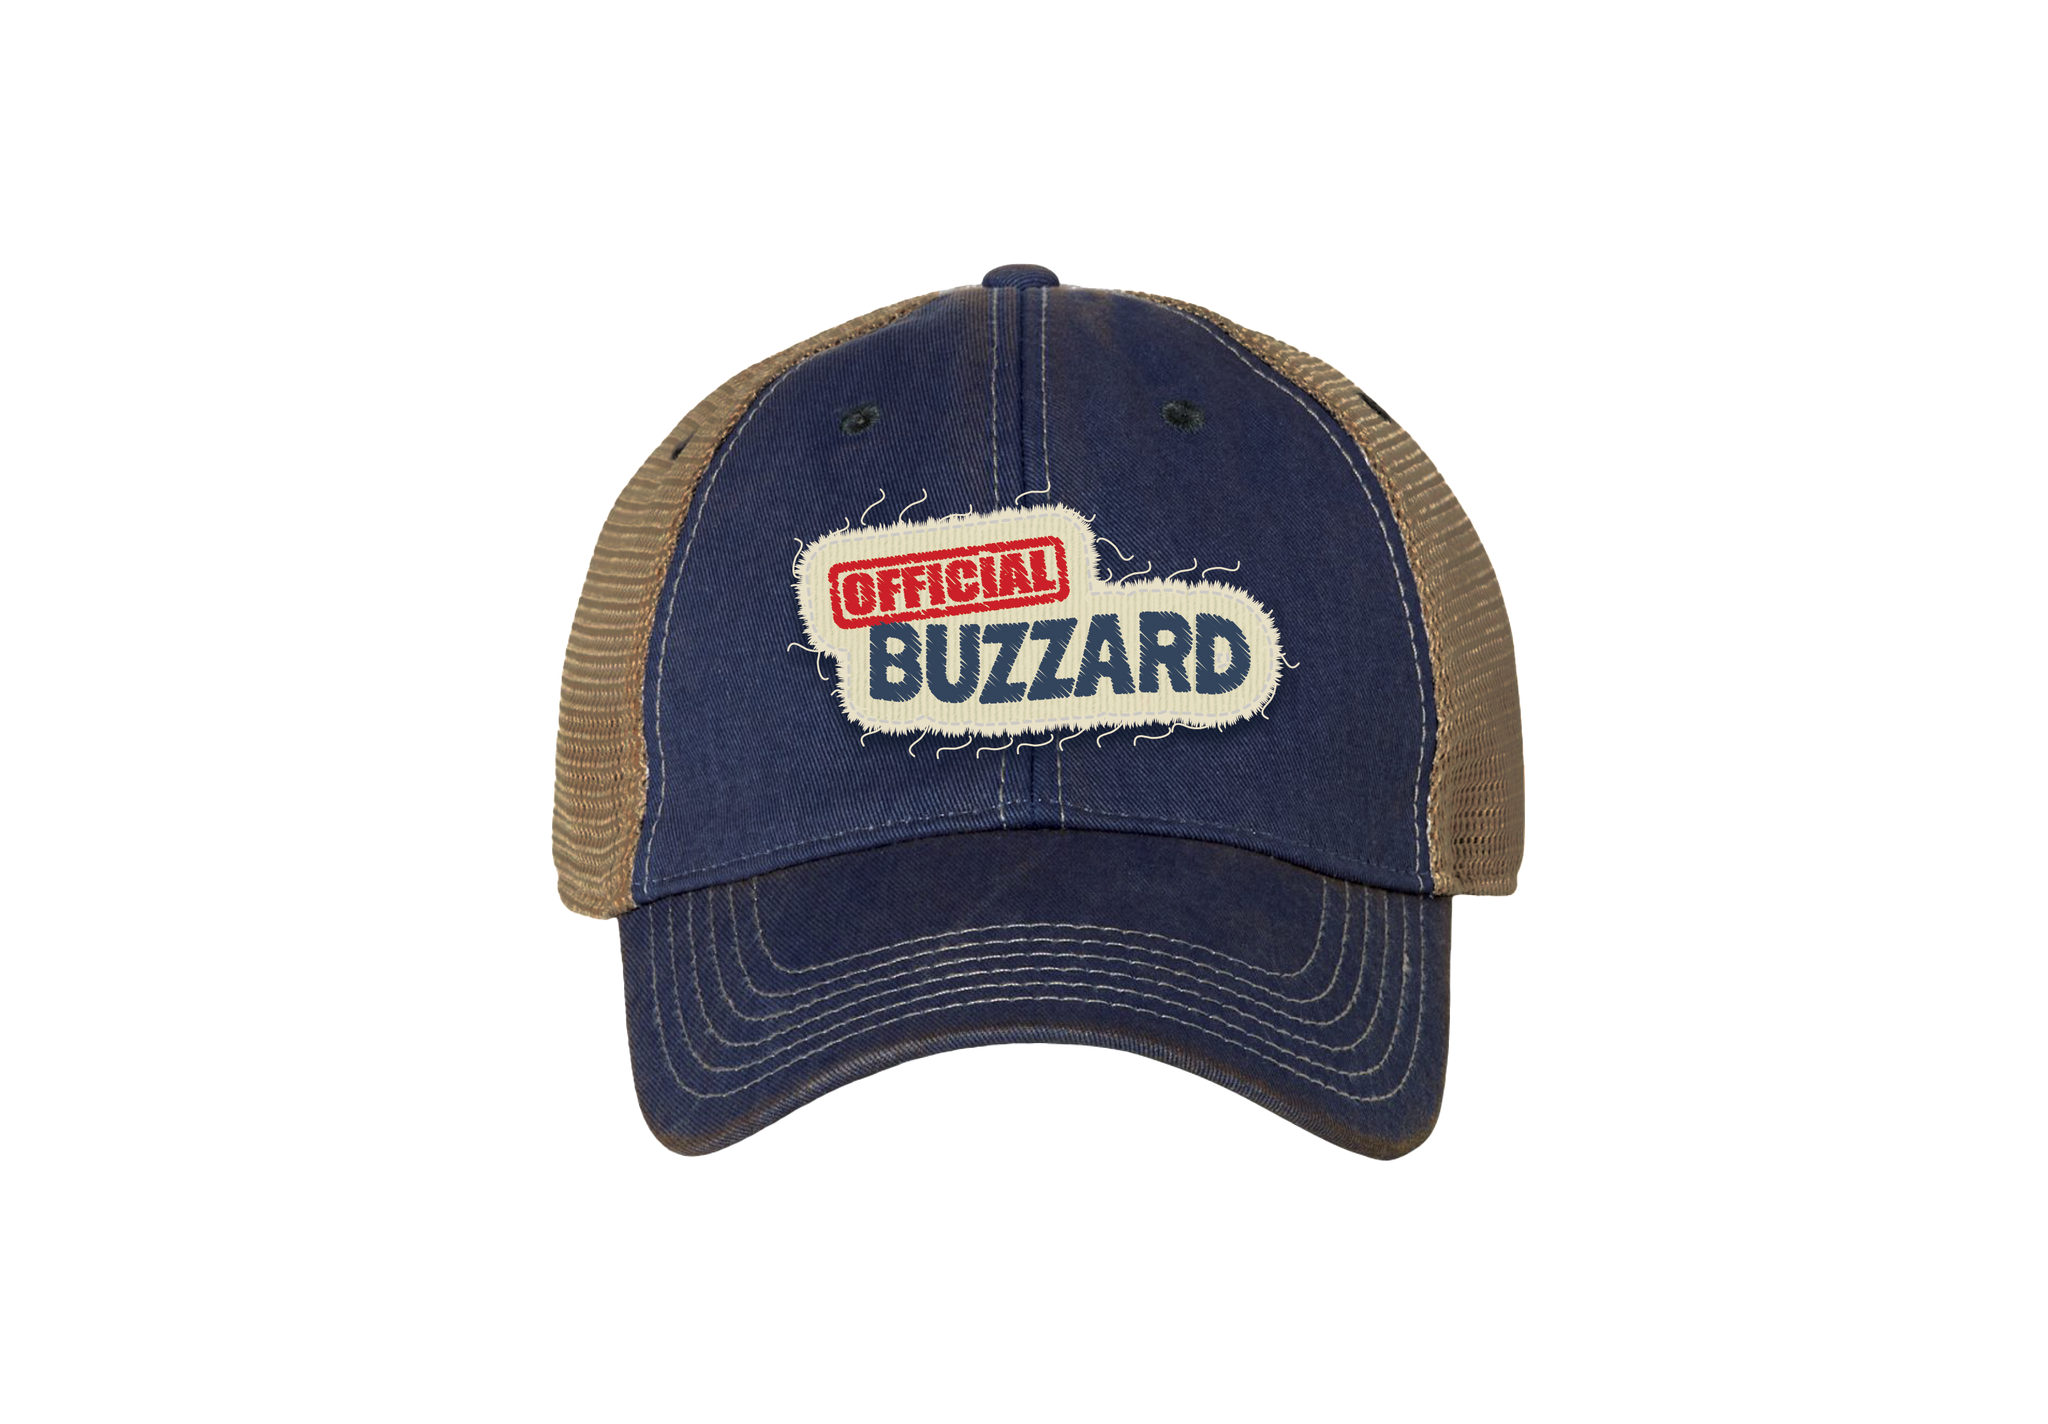 The Highway: Official Buzzard Roughed-Up Trucker Hat